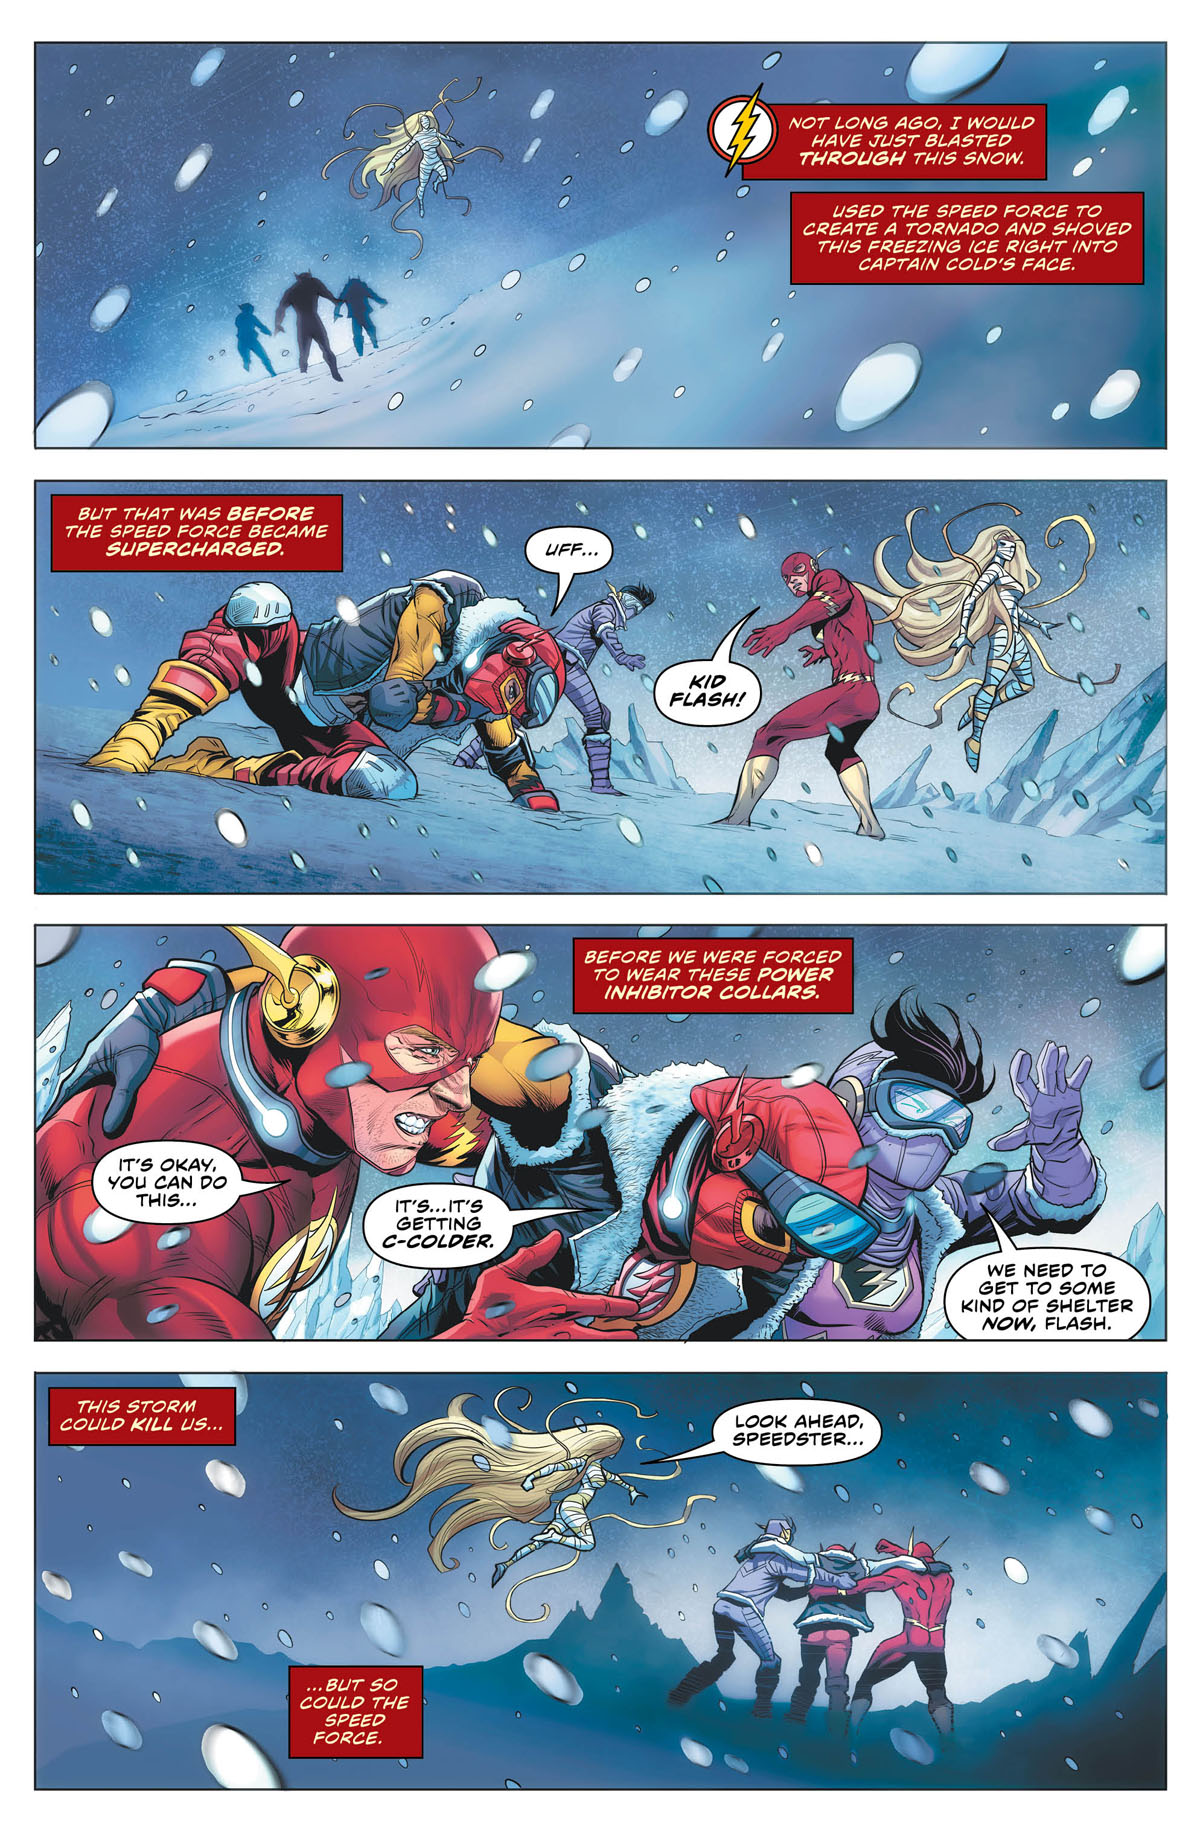 The Flash #84 page 1